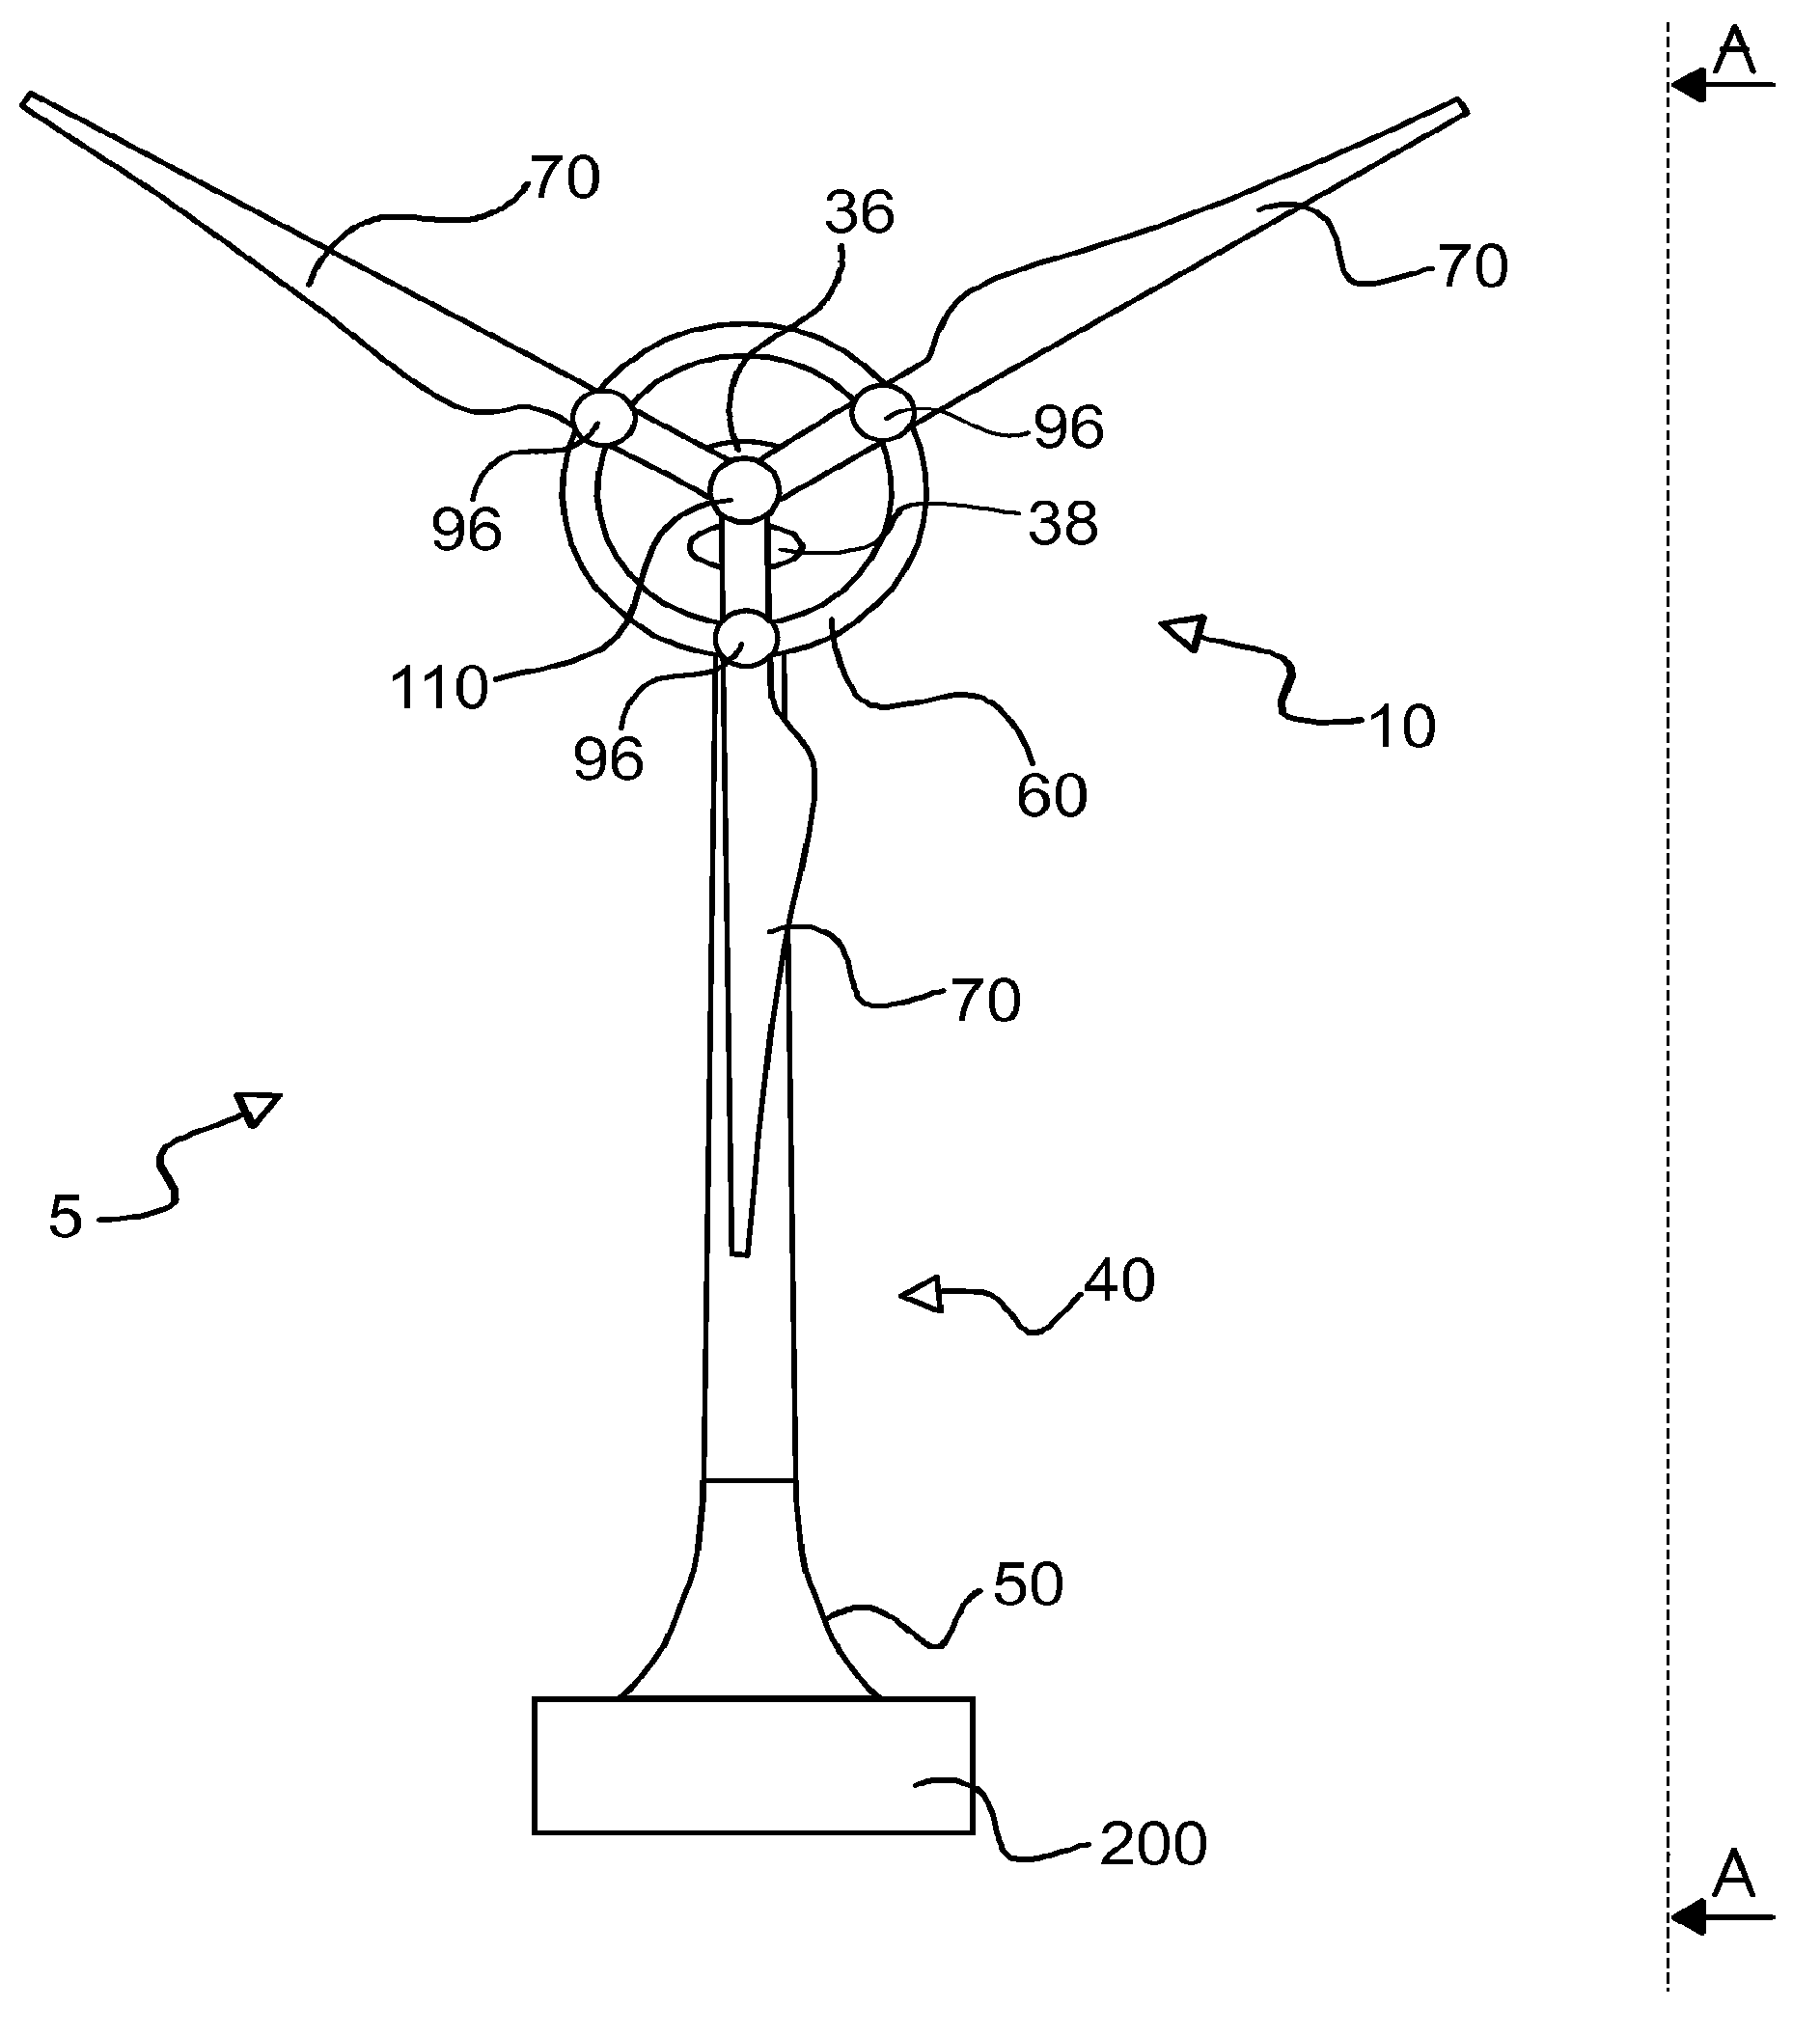 Wind turbine with integrated design and controlling method